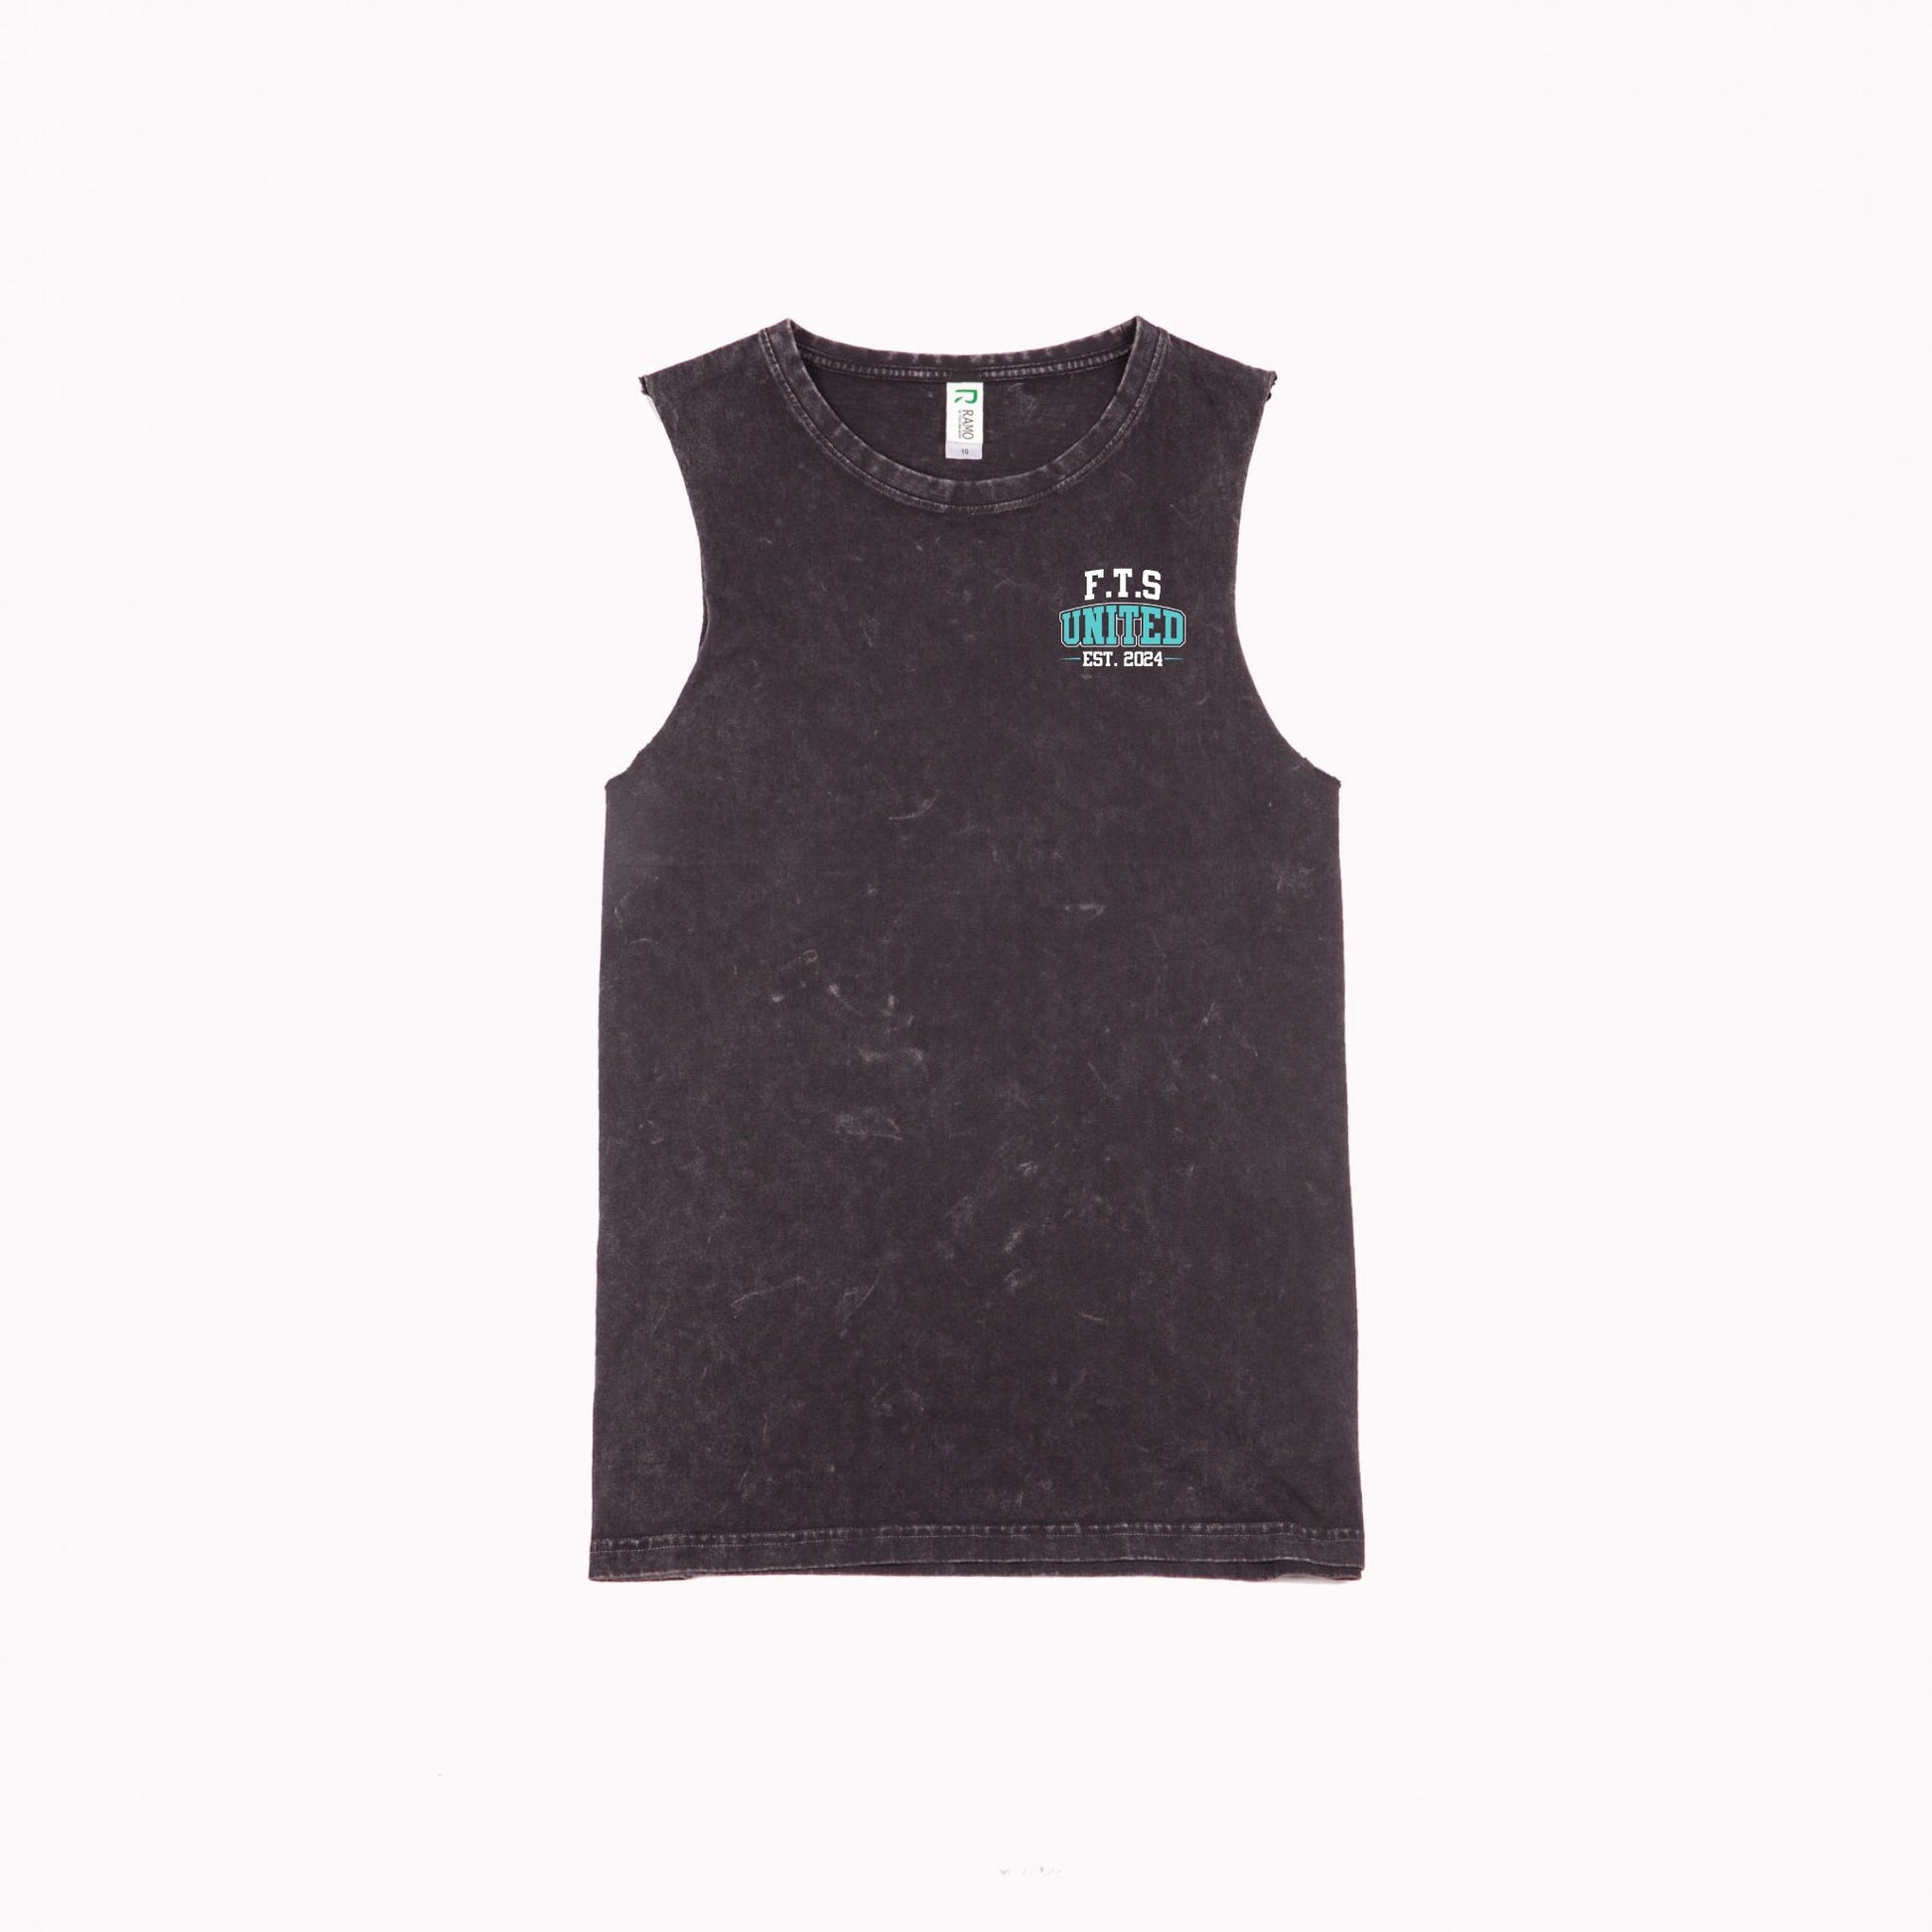 Fuck this Shit united tank tops, empowering women, made in melbourne